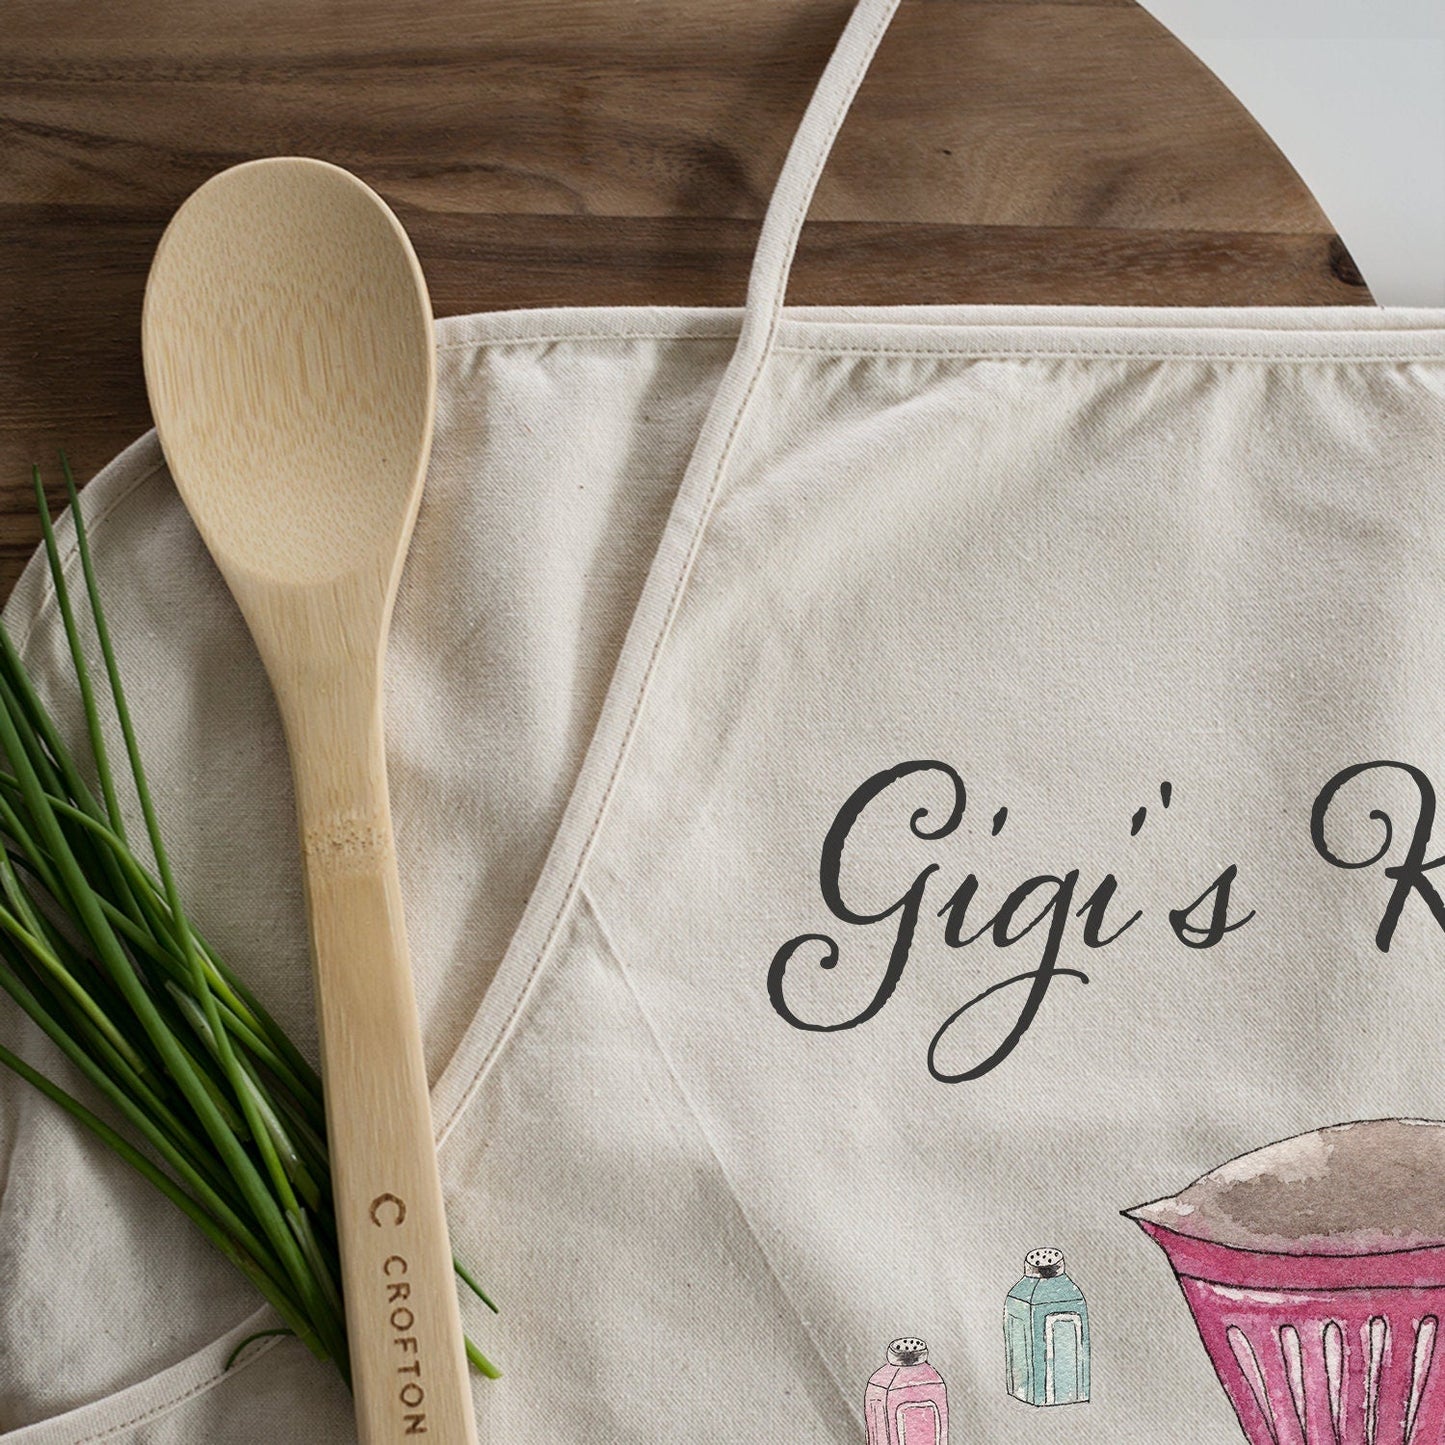 Kitchen Gifts for Mom | Birthday Gift | Personalized Gift for Mom | Mother's Day Gift from Daughter | Mother's Day Gift for the Home | Apron